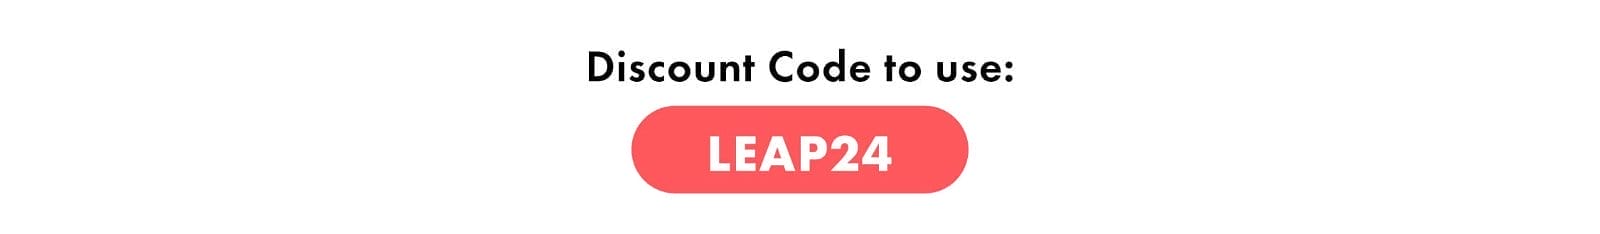 Discount Code to use: LEAP24